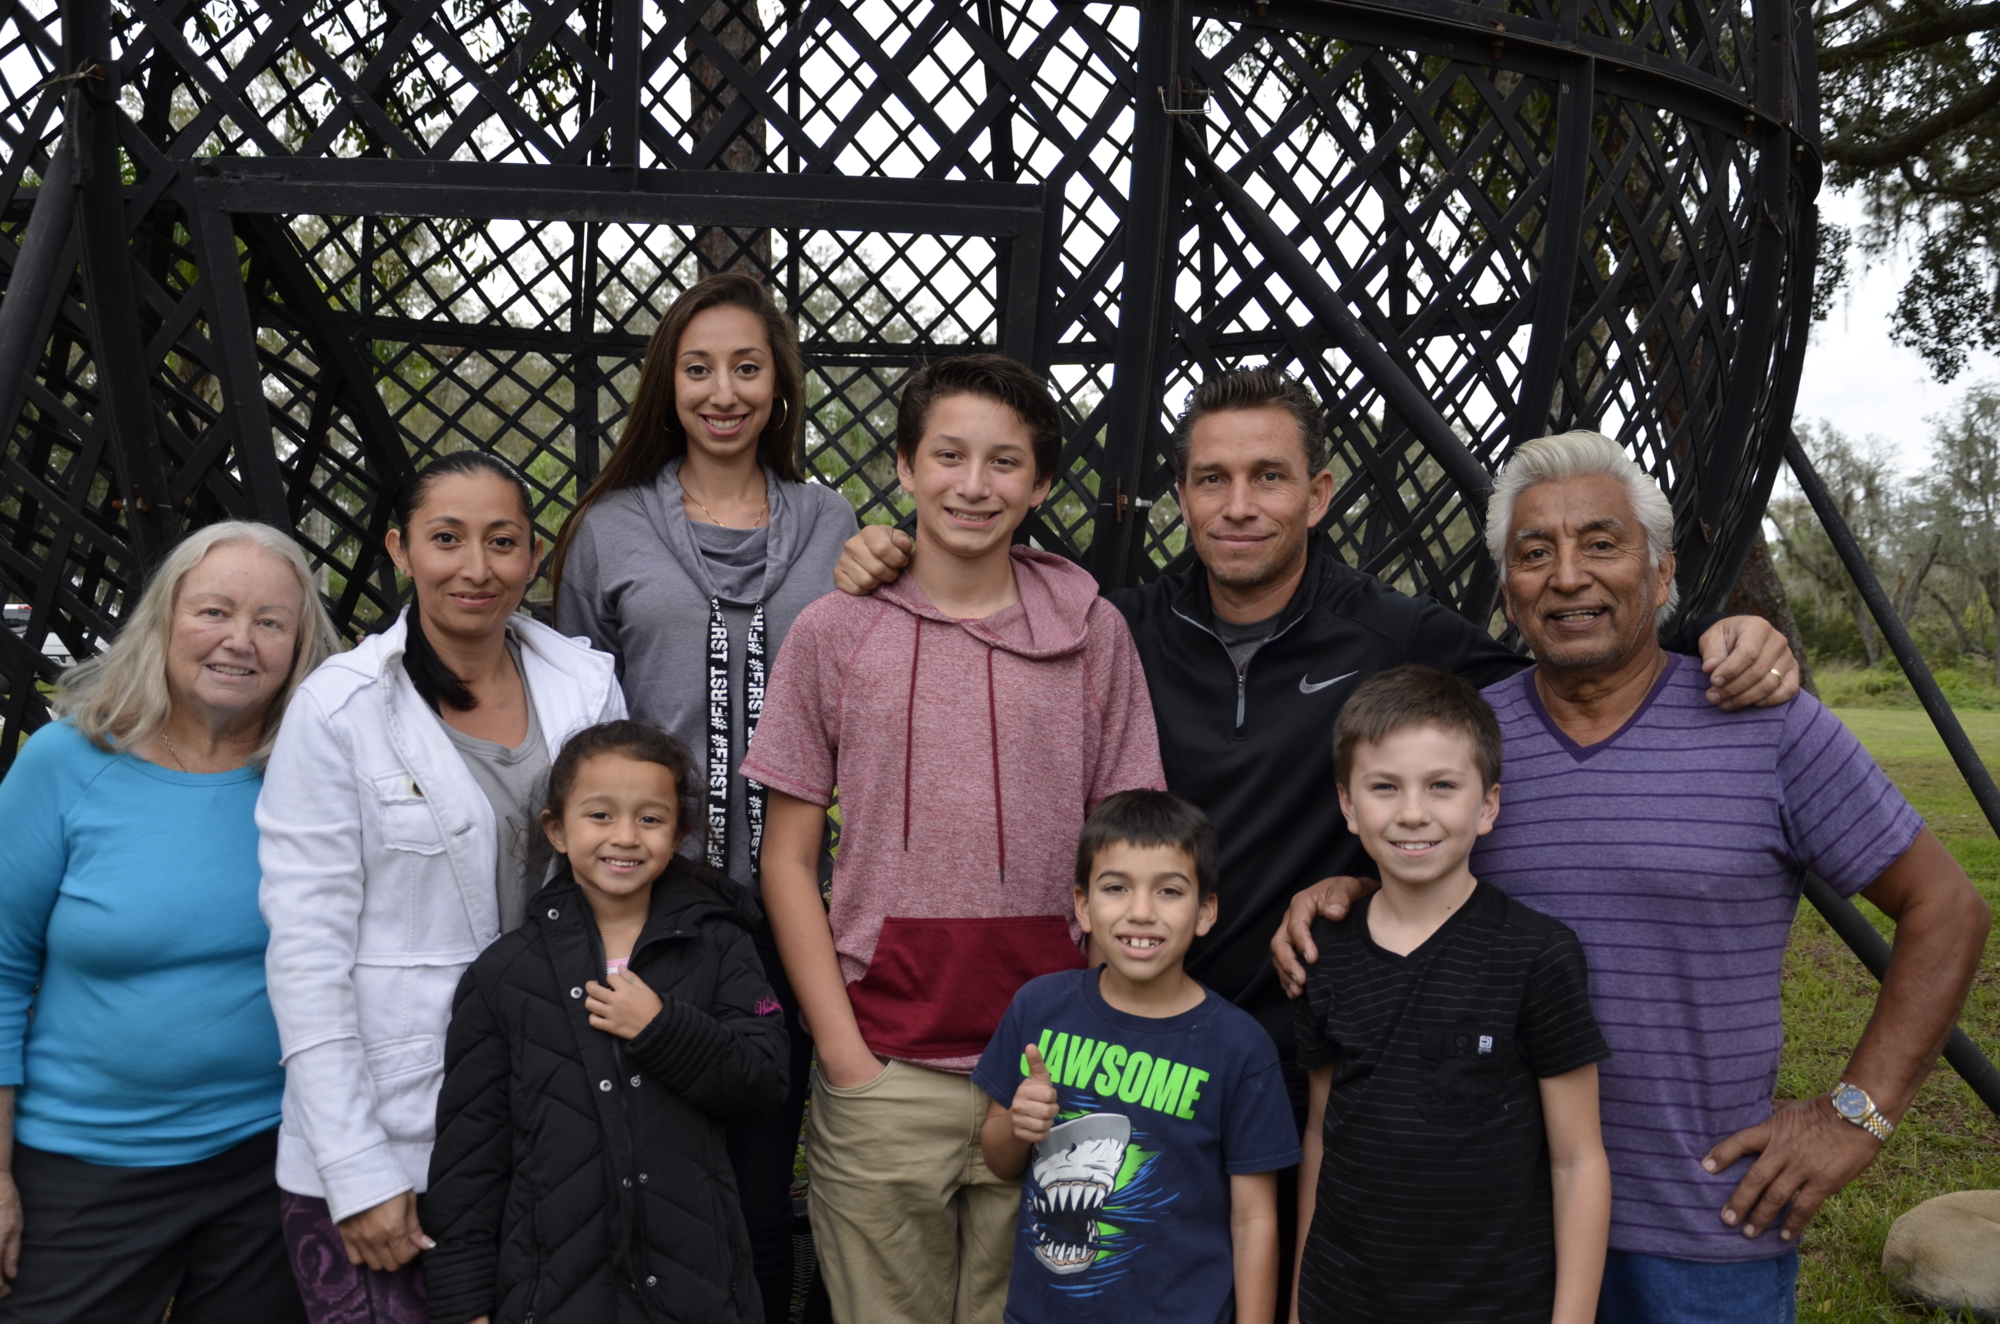 Back row: Linda, Arcelia, Cyndel, Volorian, Ricardo and Victor Flores. Front row: Ziana and cousins Victor and Giovanni Flores.